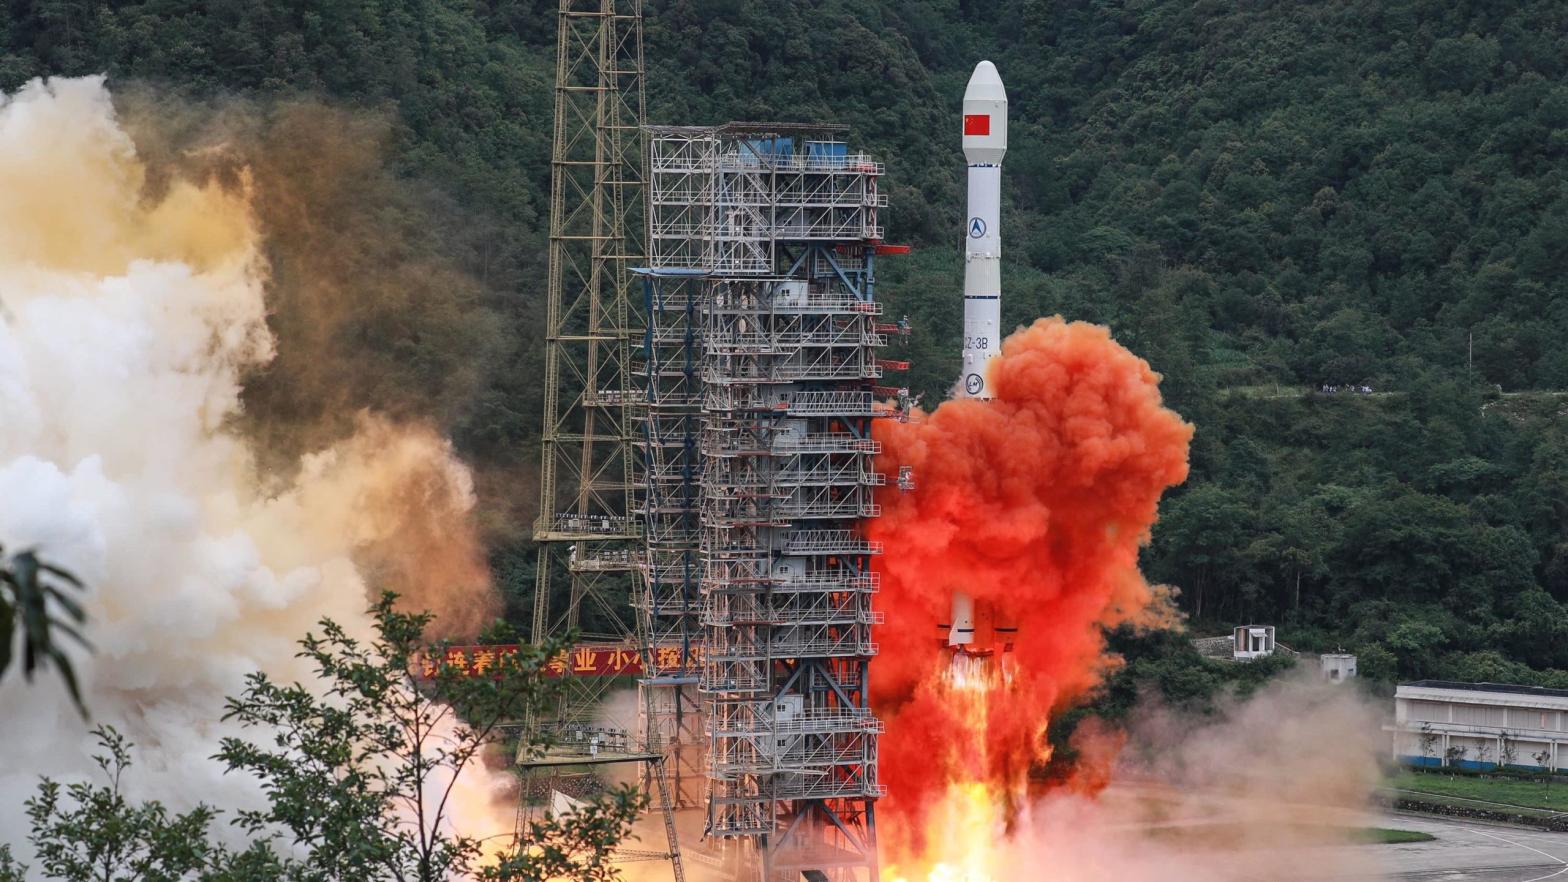 Tuesday's launch of the final BDS-3 satellite at the Xichang Satellite Launch Centre. (Photo: STR/AFP/China OUT via Getty Images)